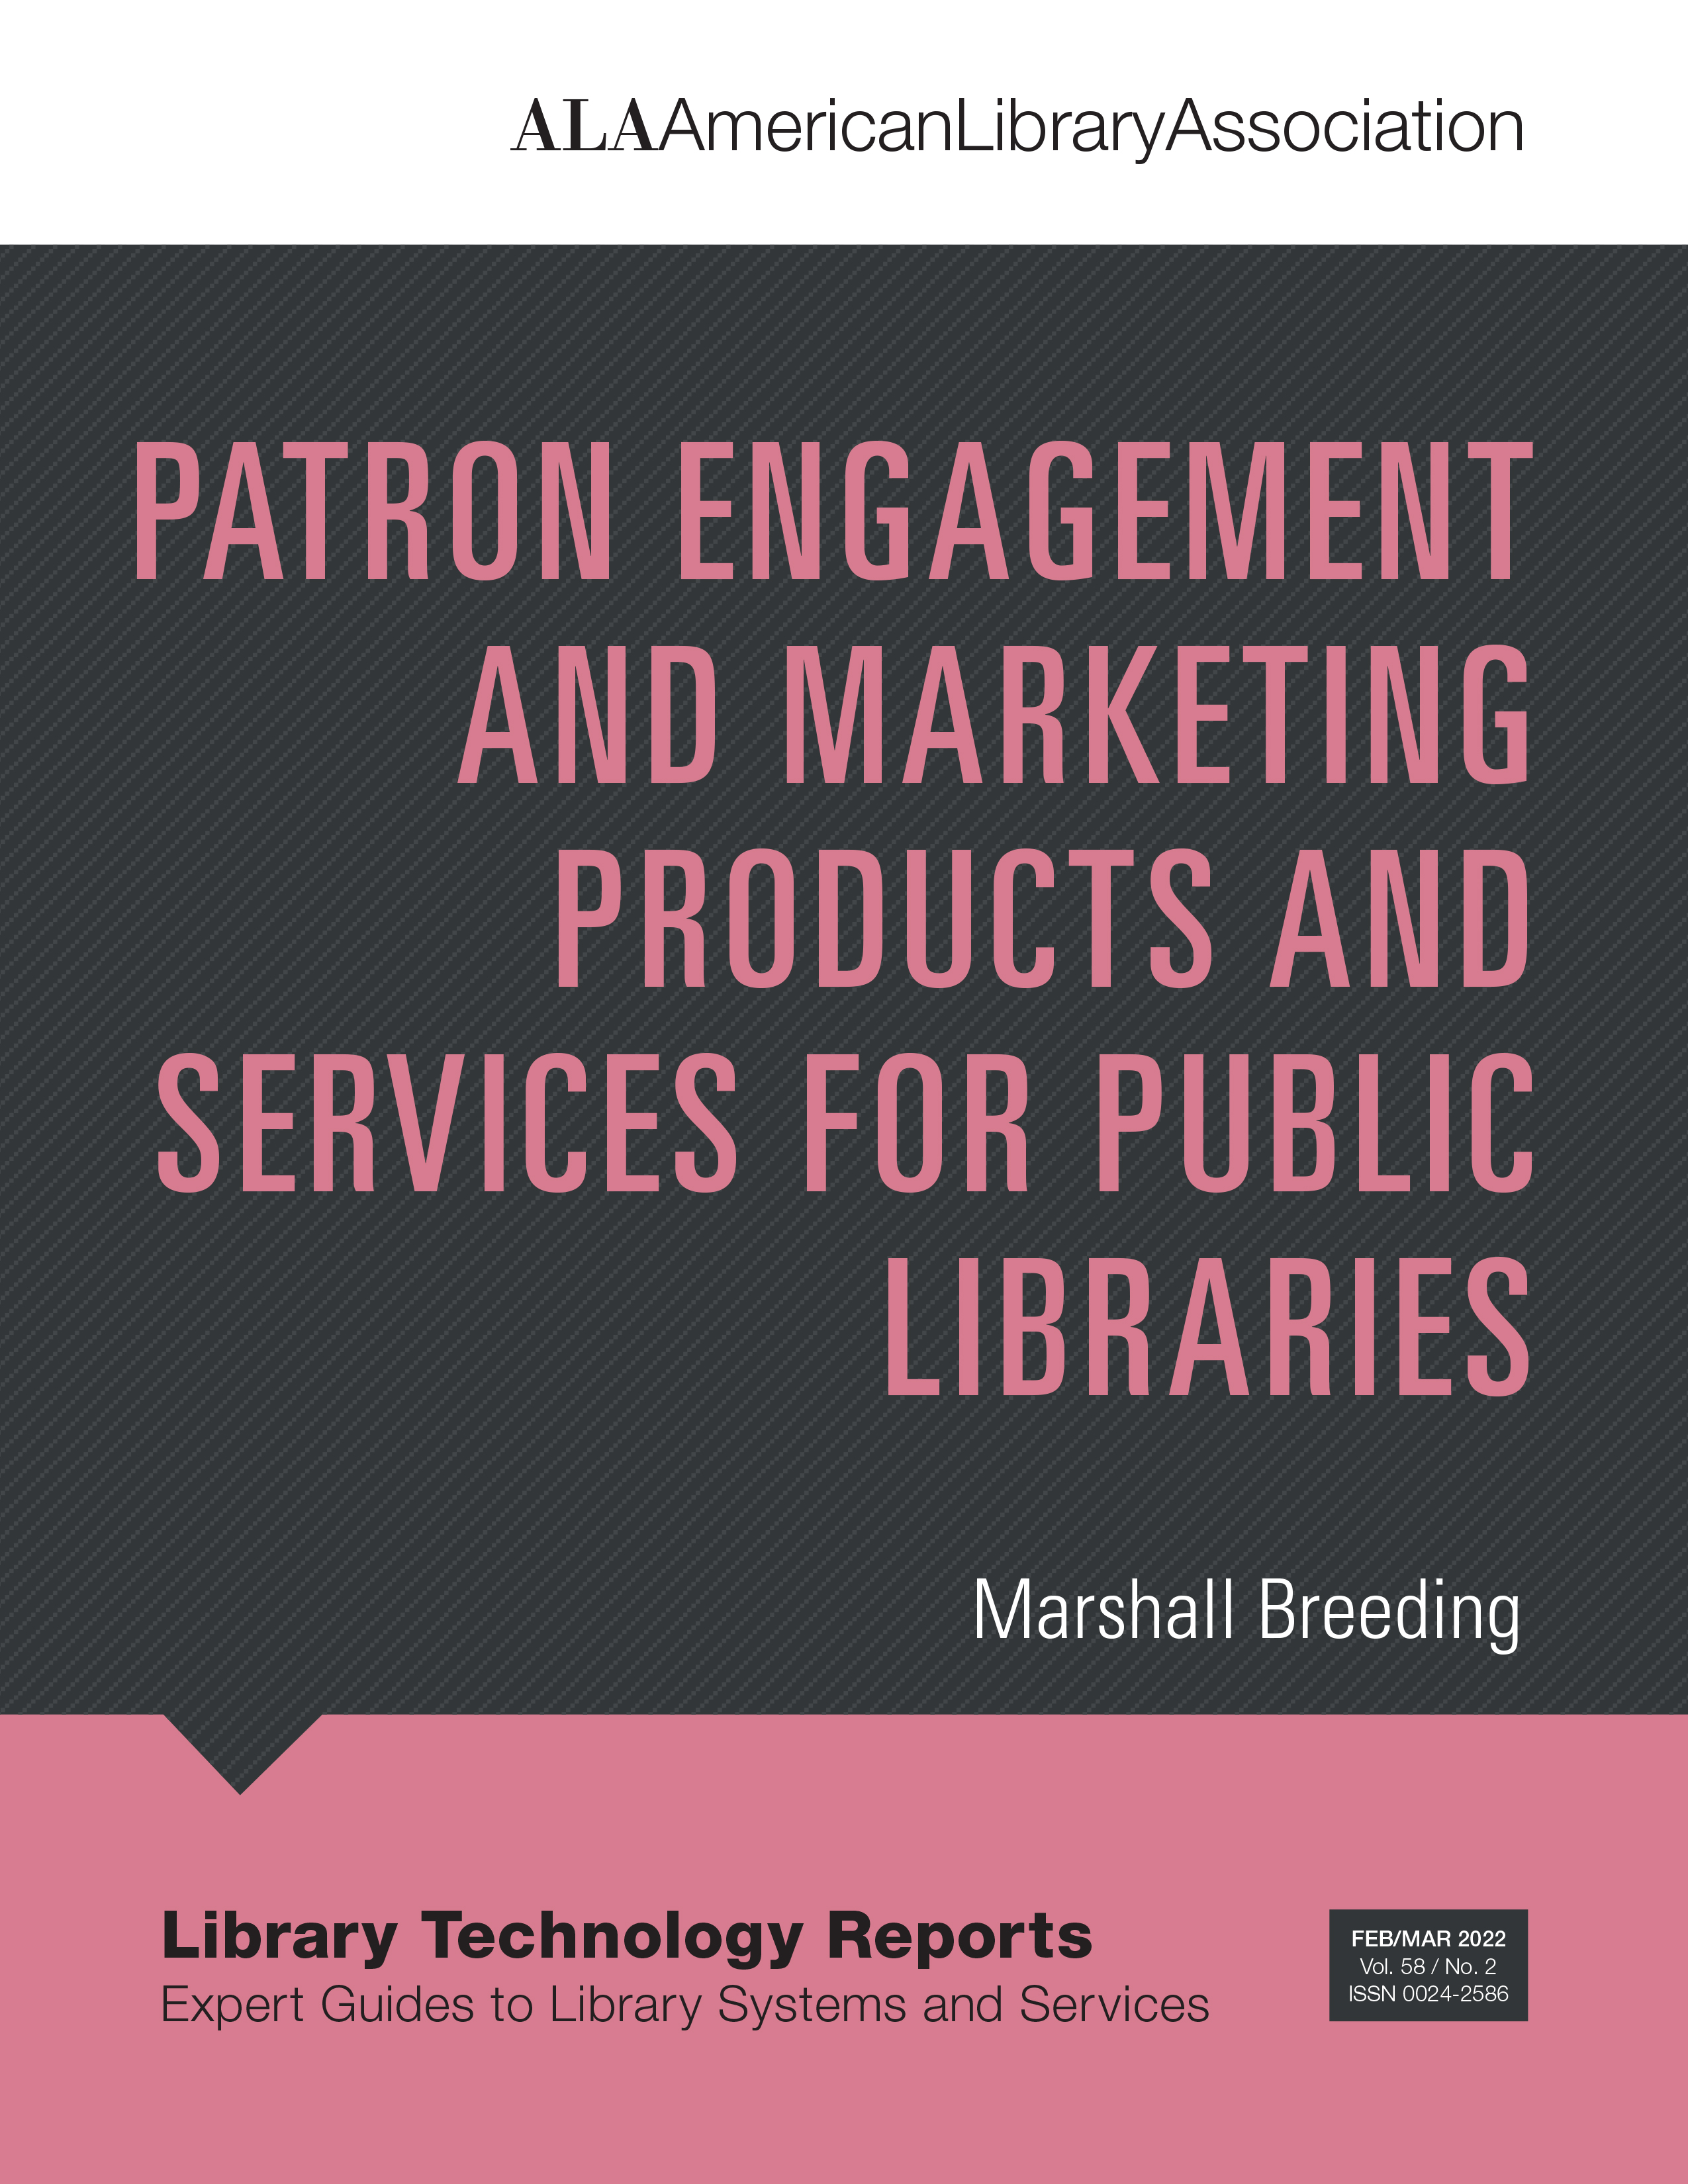 Patron Engagement and Marketing Products and Services for